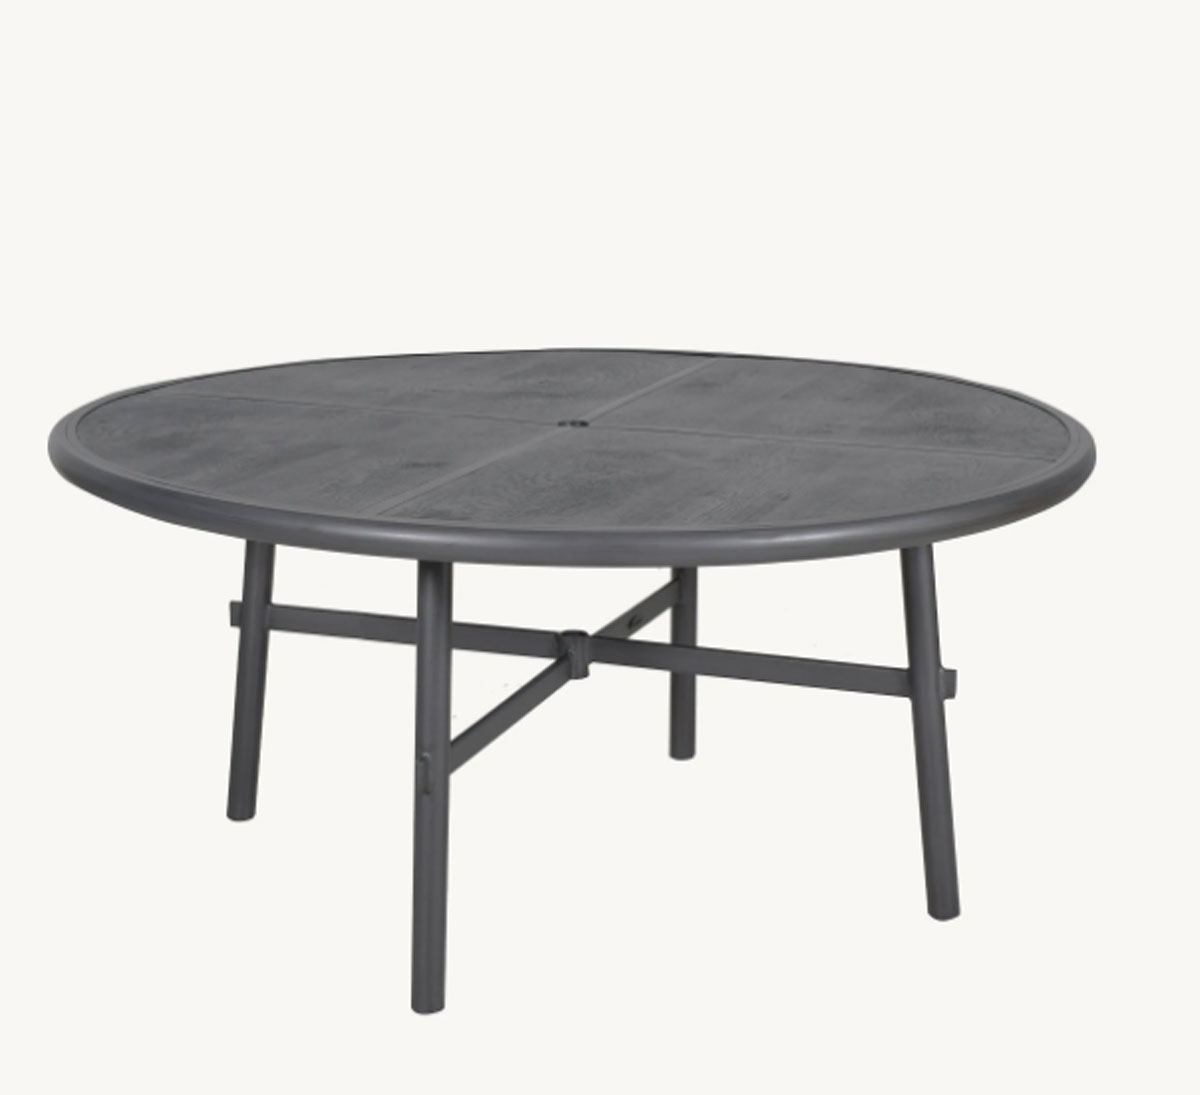 Castelle Barbados 60 inch Round Dining Table